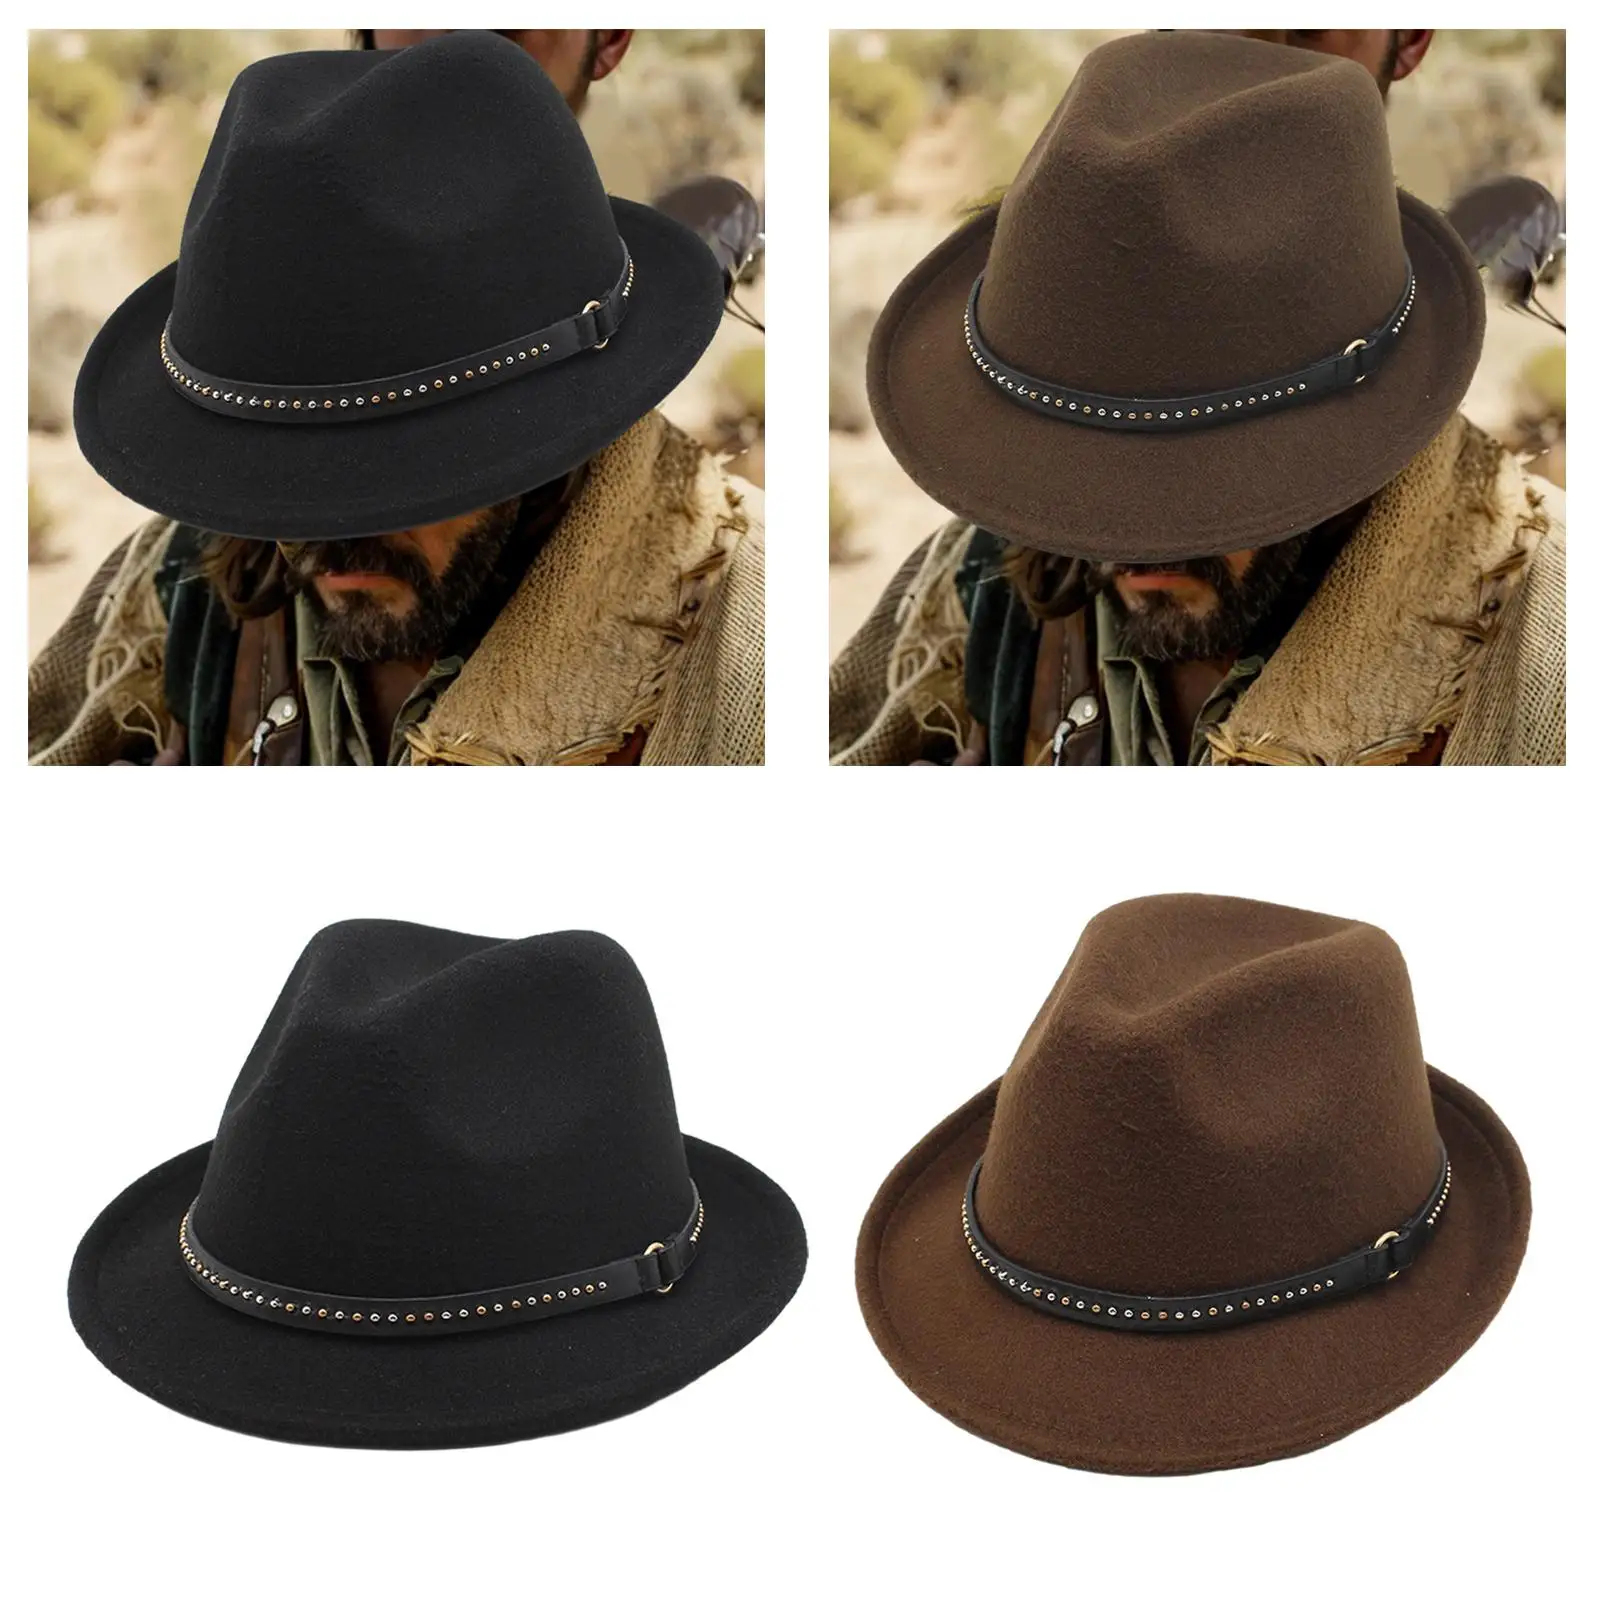 Fedora Hats Costume Accessory Decorated Fashion Western Cowboy Hat Casual Sun Hat Jazz Cap Short Brim for Travel Dress up Events